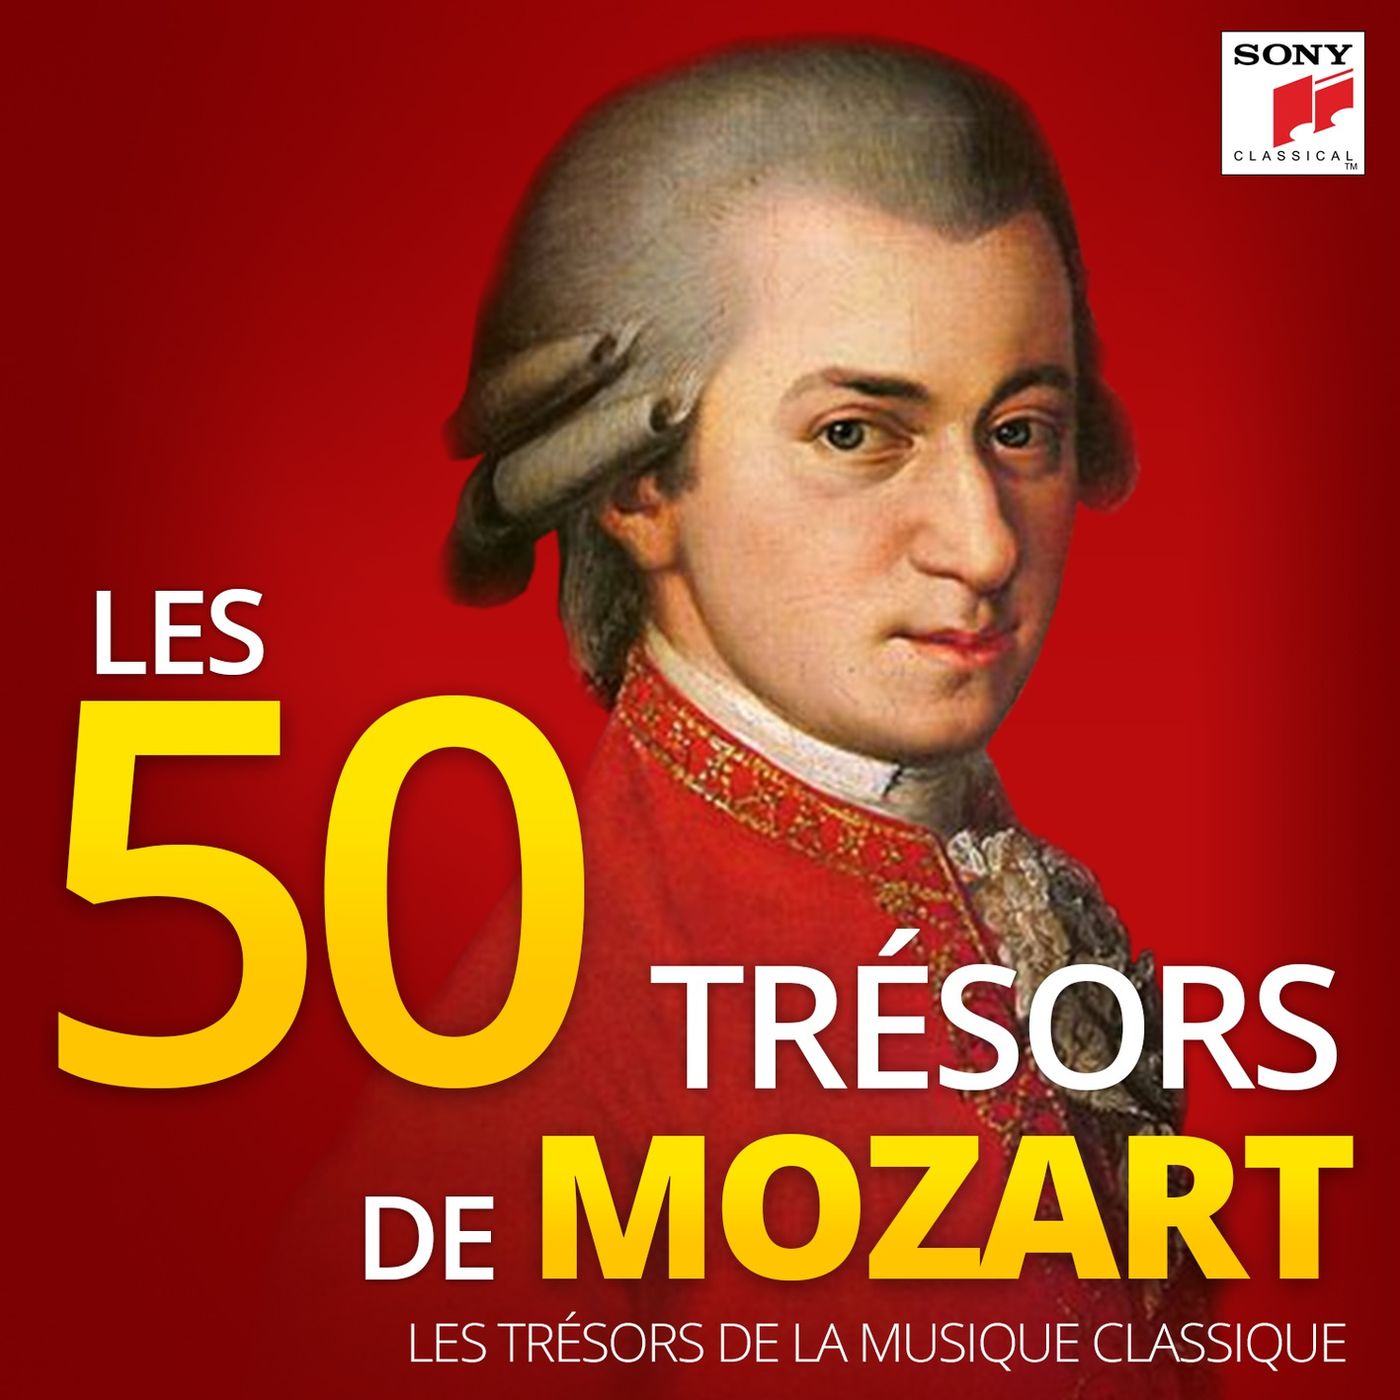 mozart classical music mp3 download